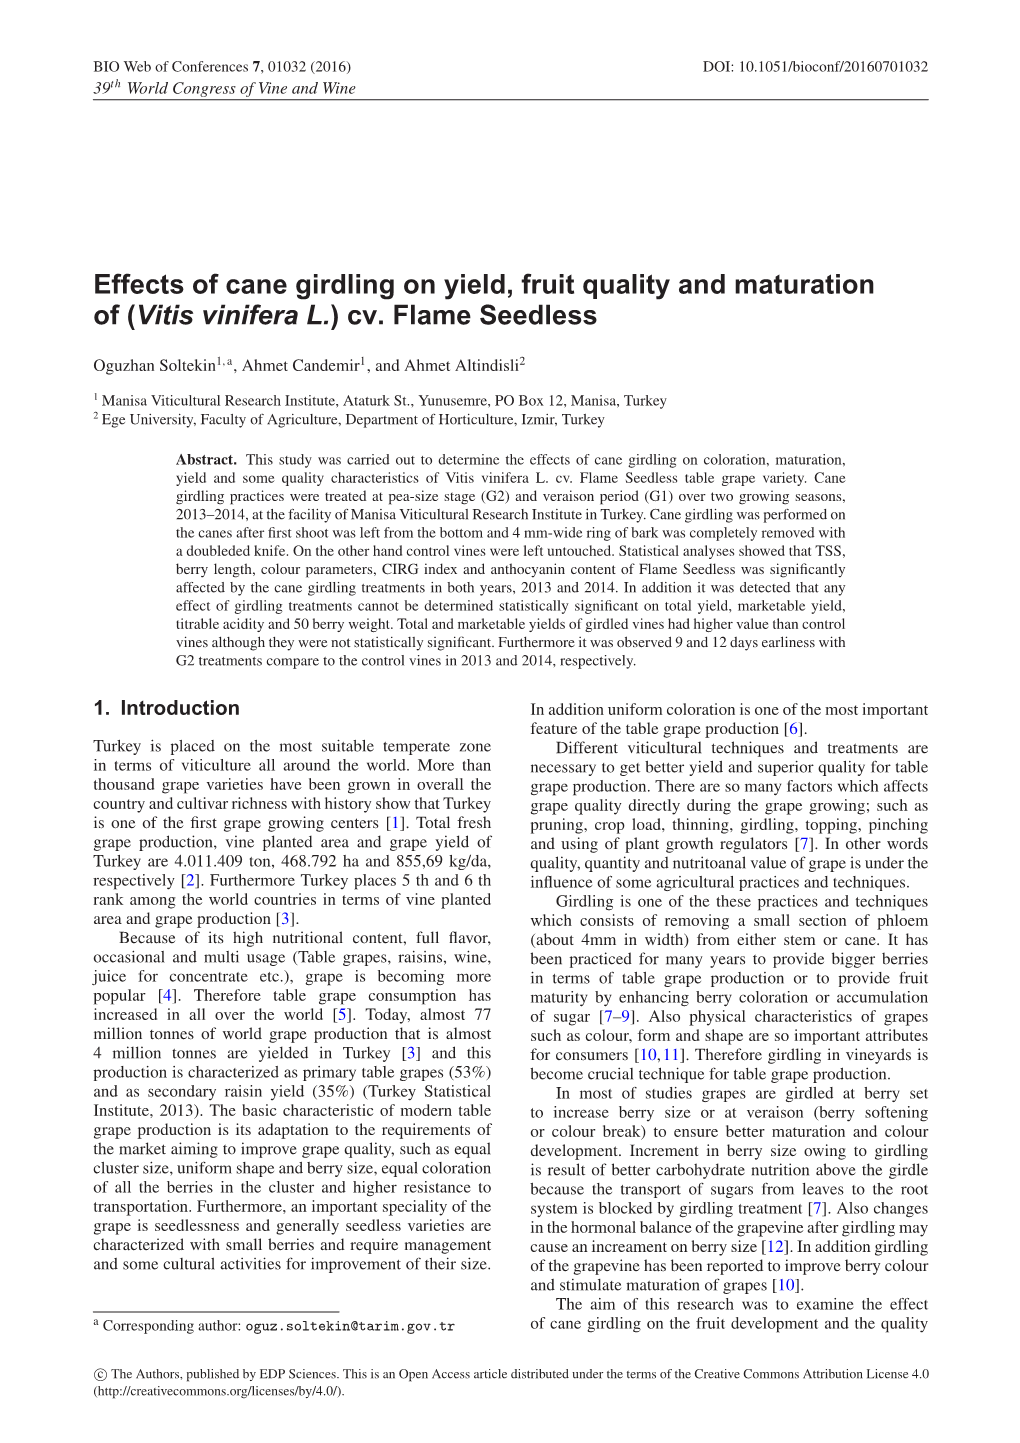 Effects of Cane Girdling on Yield, Fruit Quality and Maturation of (Vitis Vinifera L.) Cv